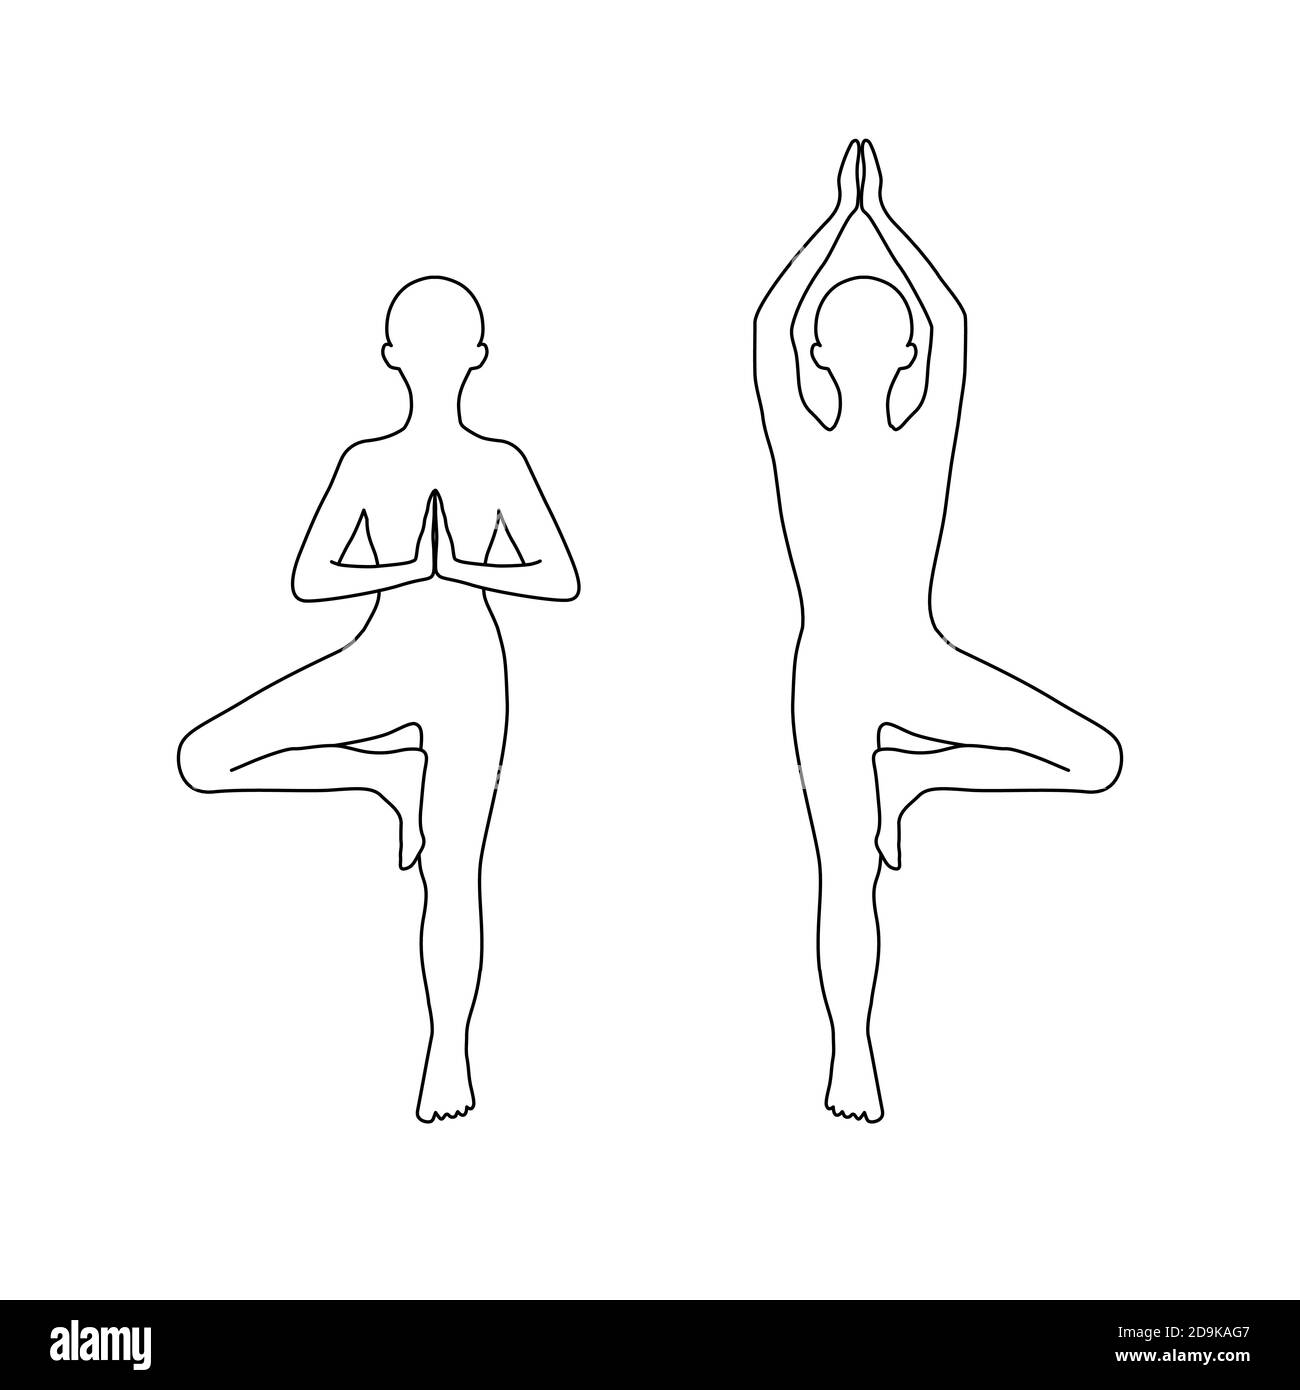 Tree Pose Vrikshasana Black Line Icon Balancing Asana Entire Sole of the  Foot Remains in Contact with the Floor Stock Illustration  Illustration of  vector template 181519997